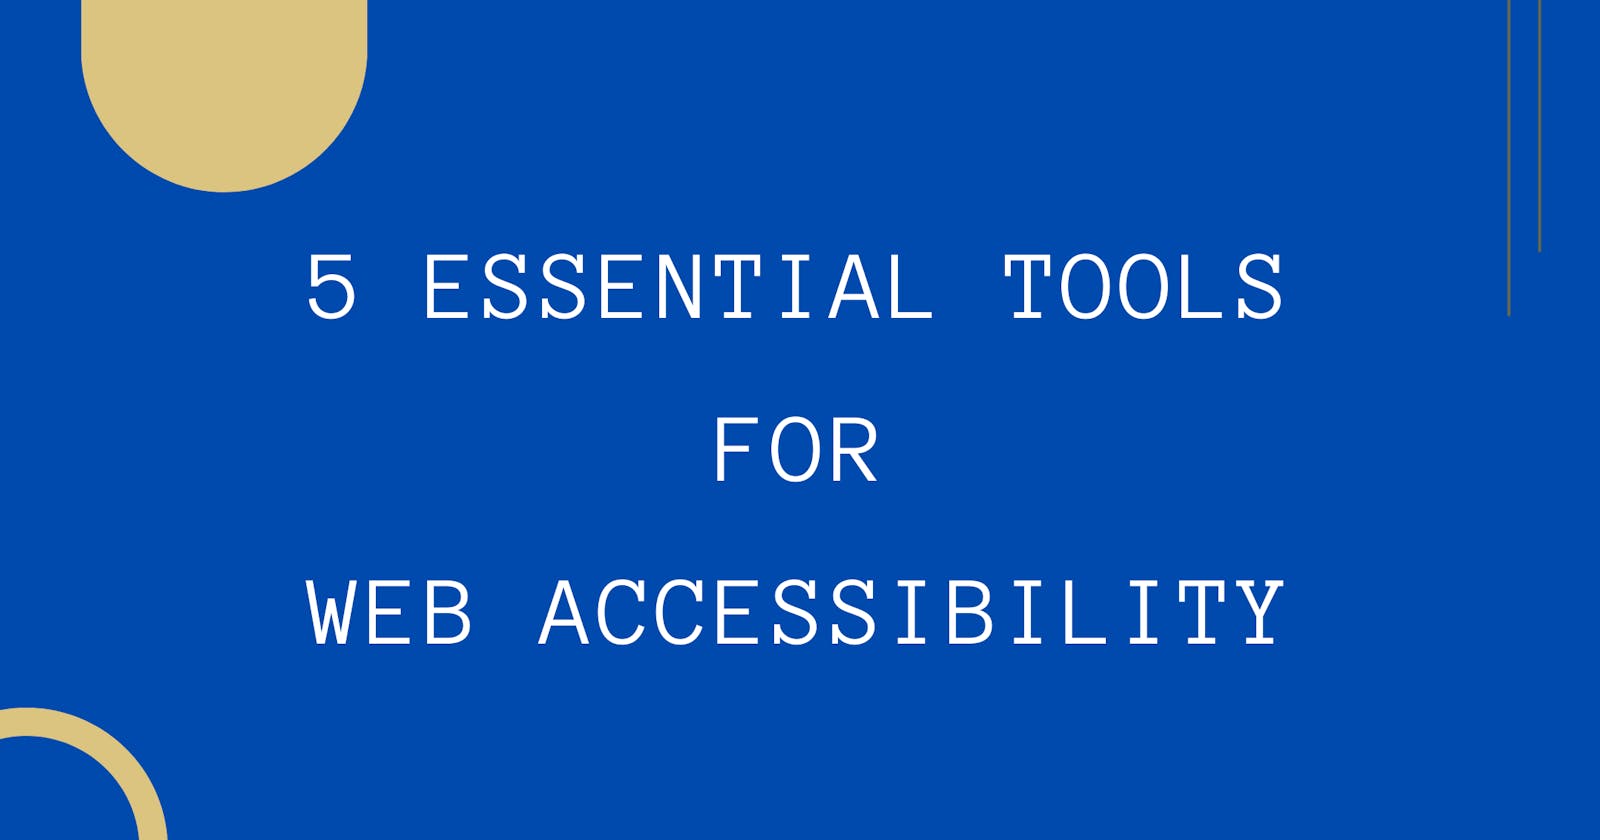 5 Essential Tools for Web Accessibility